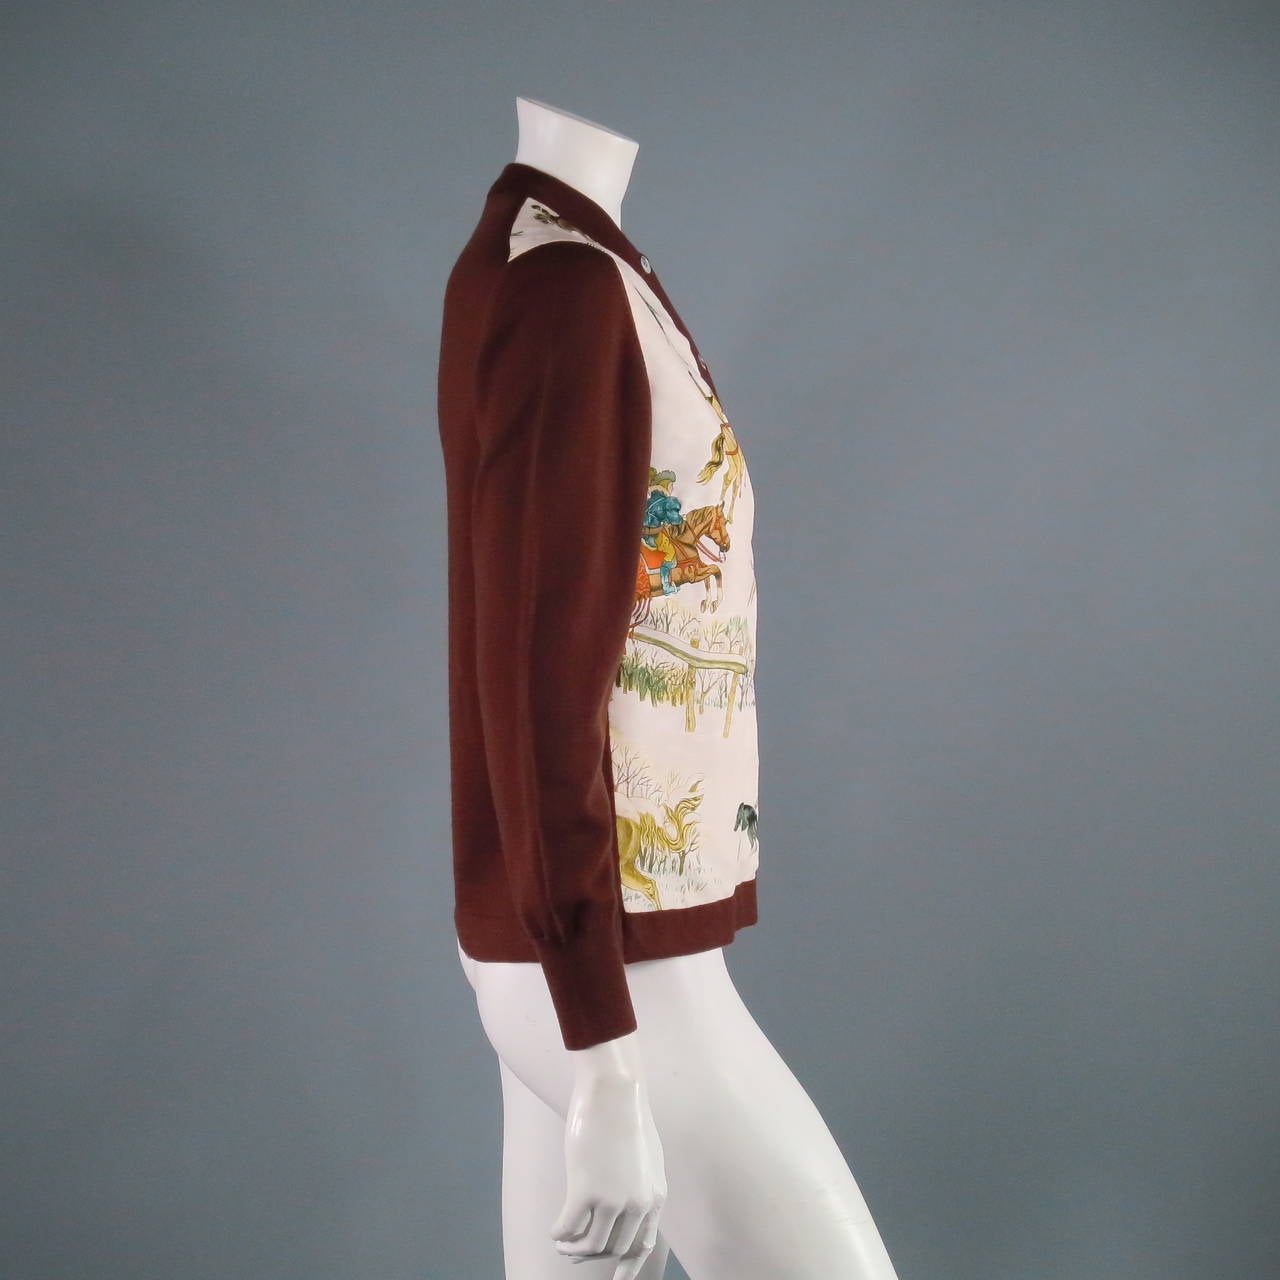 Beautiful Hermes silk winter illustration graphic with wool sleeves. A fabulous holiday addition. Made in France.
  
Measurements:
Shoulder to Shoulder- 17 inches
Bust- 19 inches
Length of Cardigan- 23 inches
Length of Sleeve- 23 inches